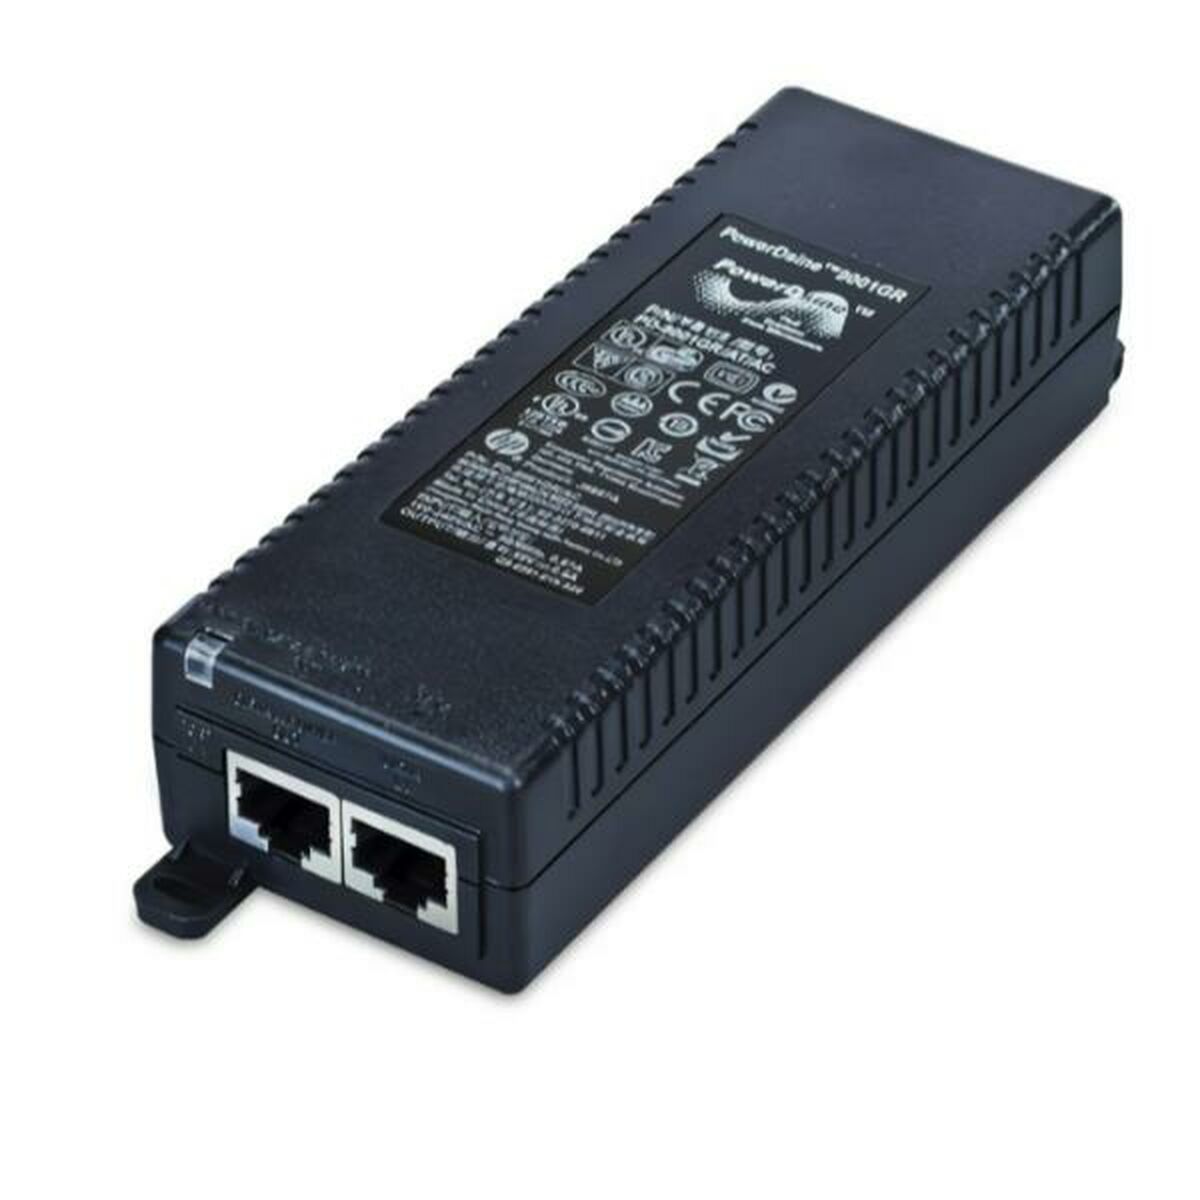 PoE Injector HPE R9M77A, HPE, Computing, Network devices, poe-injector-hpe-r9m77a, Brand_HPE, category-reference-2609, category-reference-2803, category-reference-2827, category-reference-t-19685, category-reference-t-19914, category-reference-t-21367, Condition_NEW, networks/wiring, Price_50 - 100, Teleworking, RiotNook